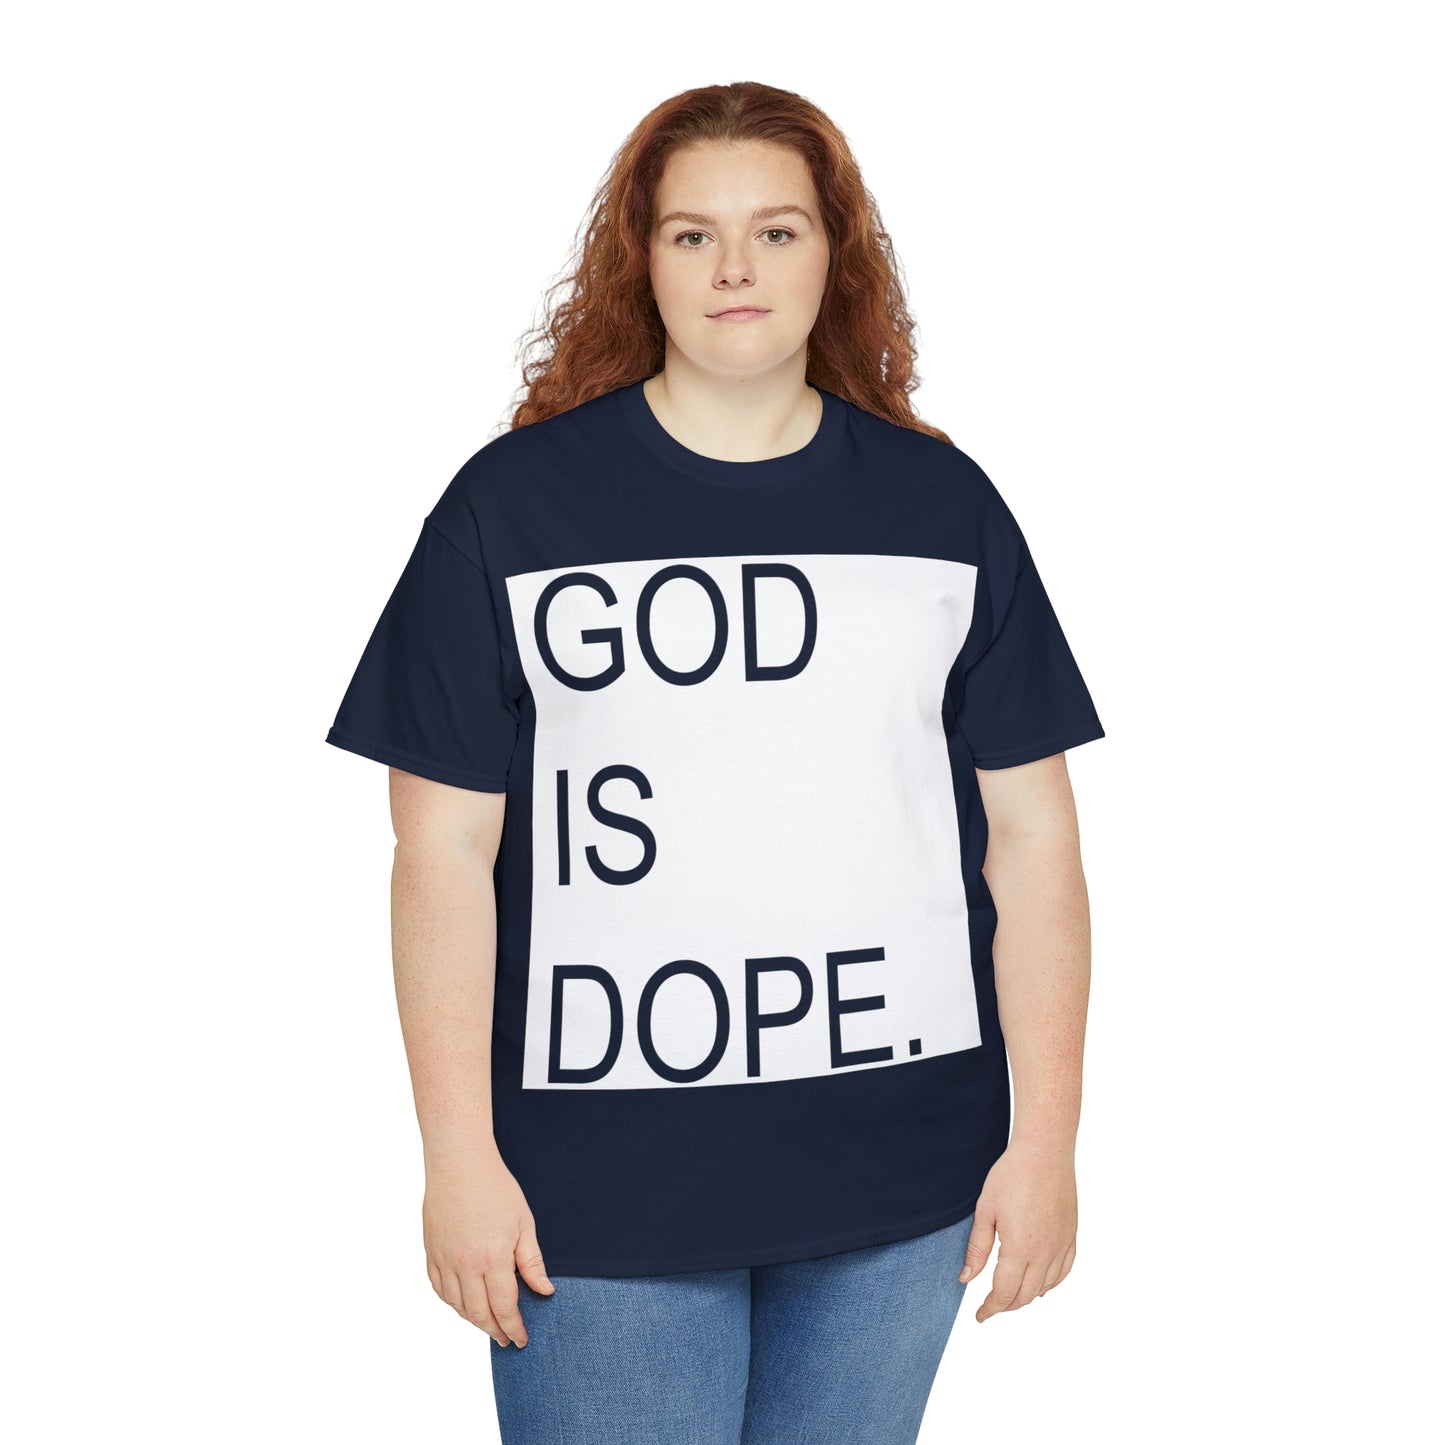 God Is Dope Shirt - Up to 5X